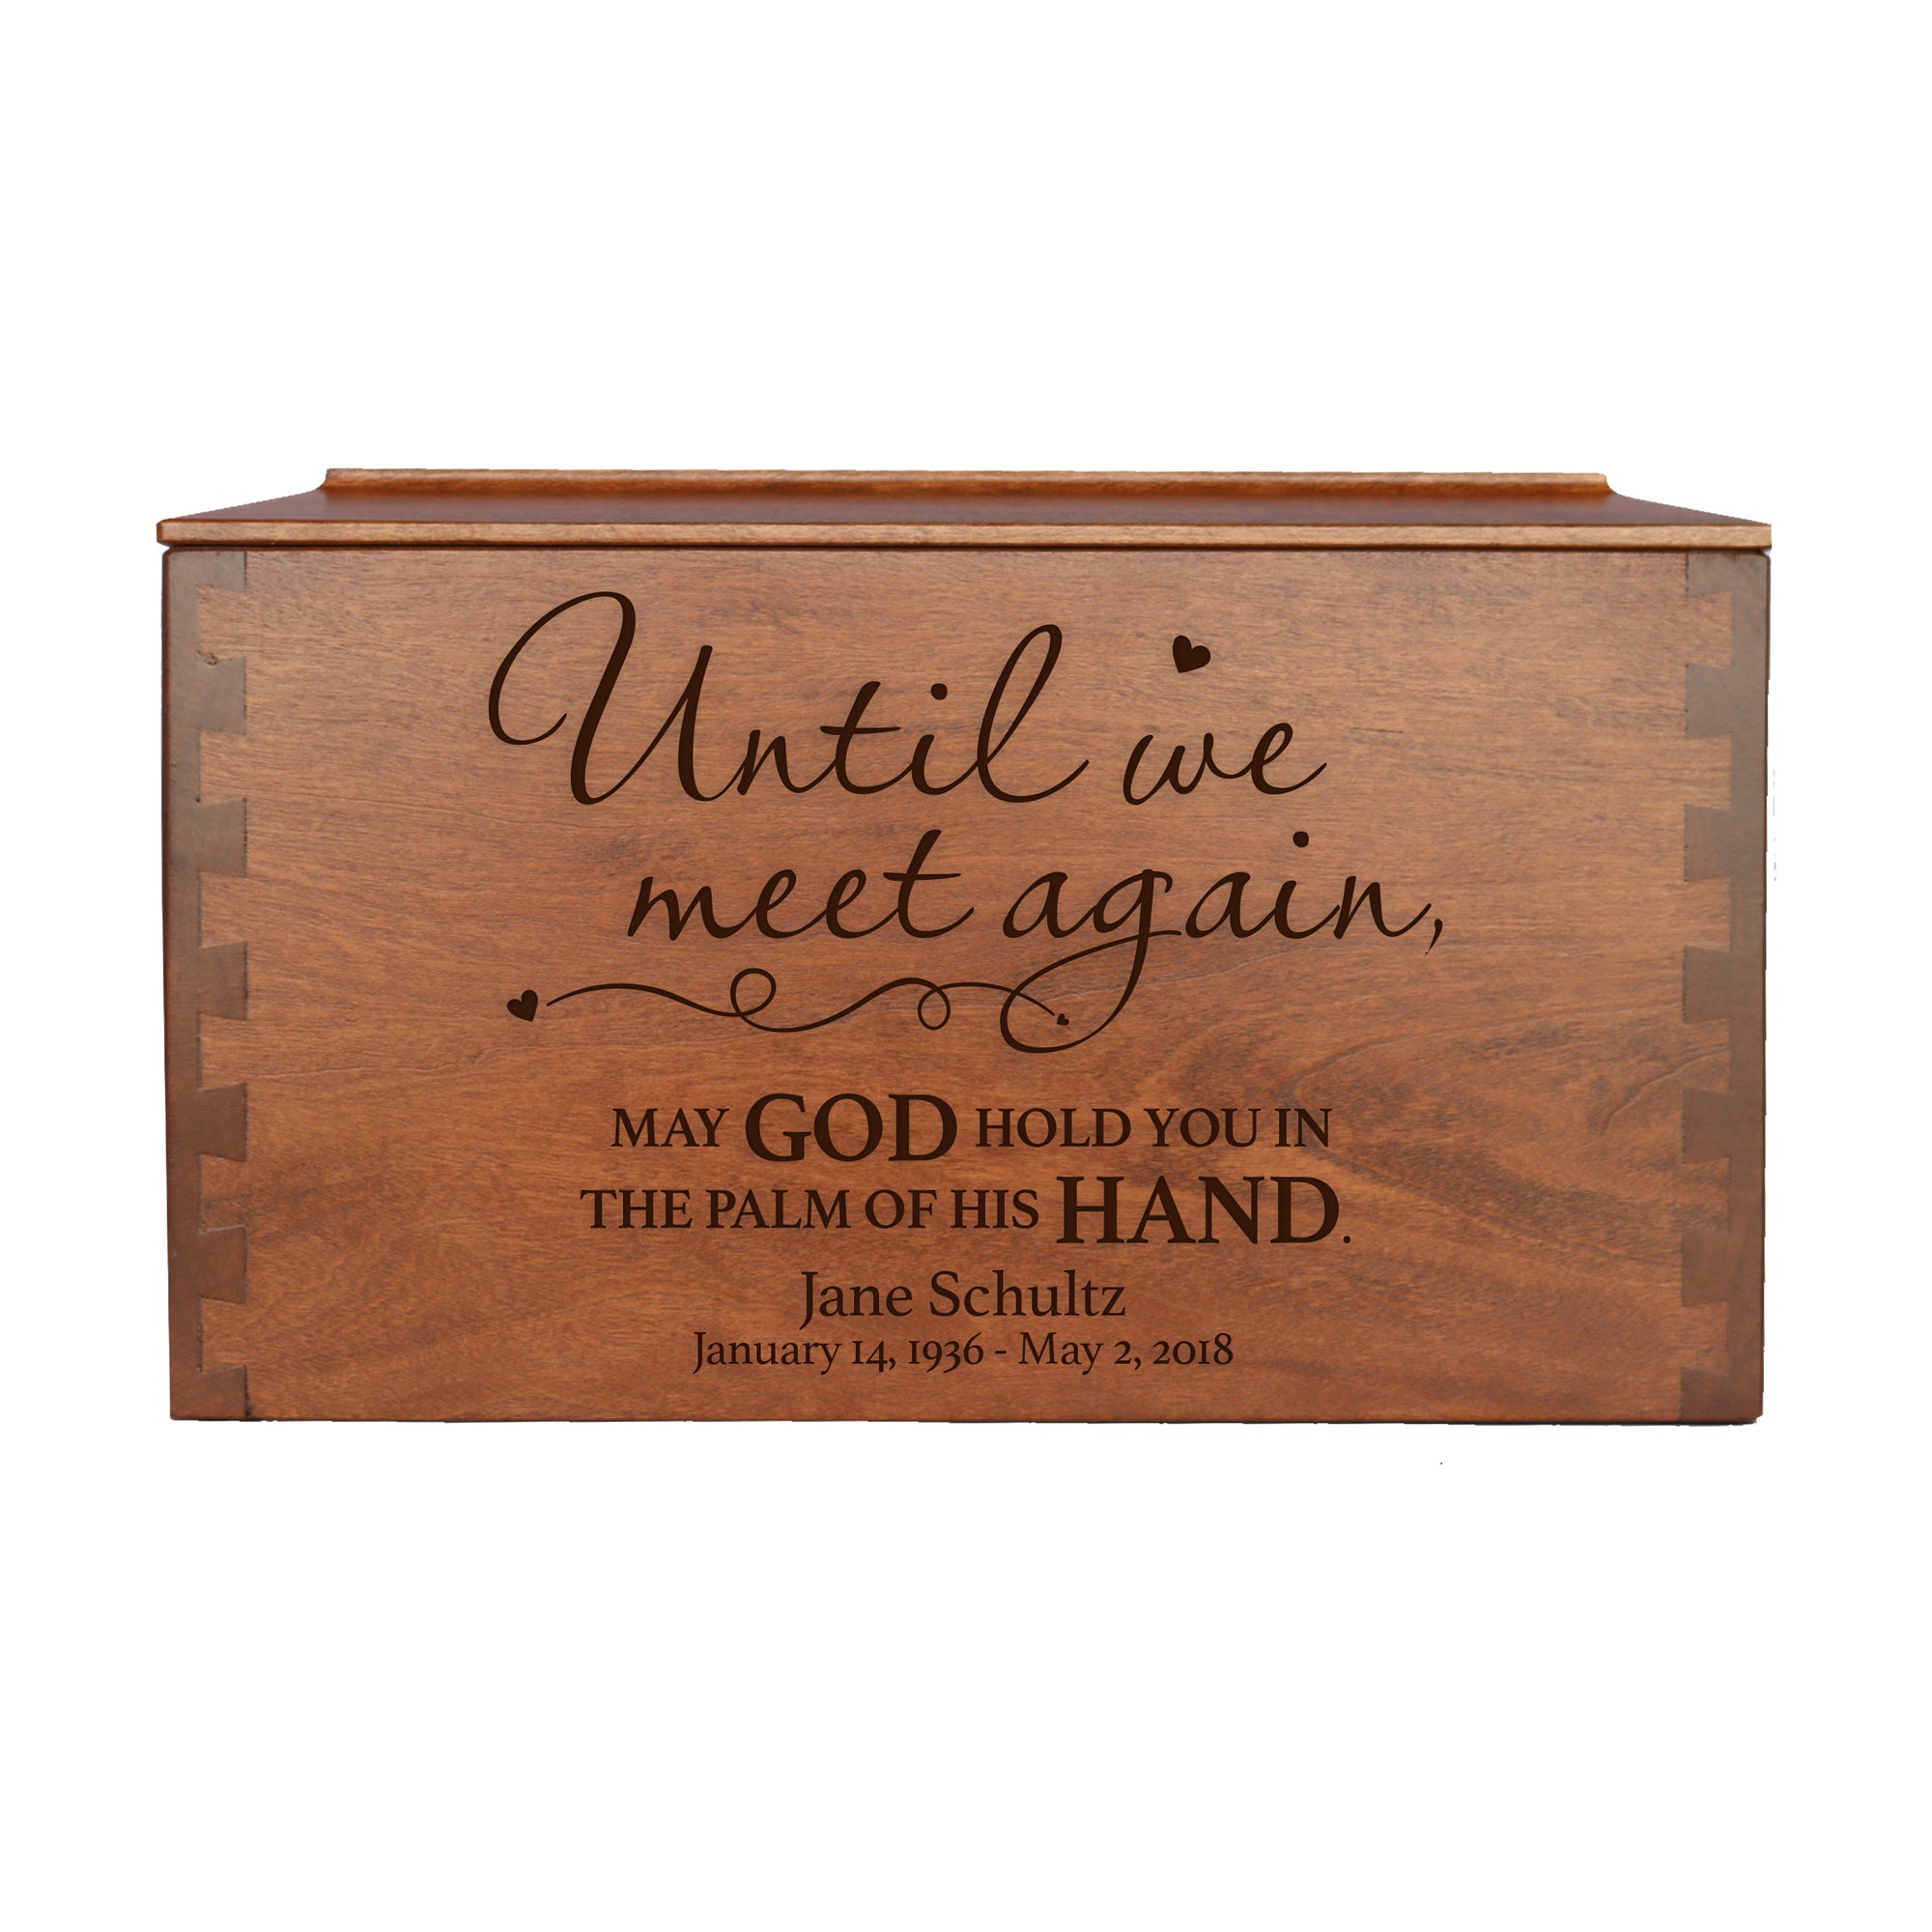 Until We Meet Again LifeSong Memorials Personalized Memorial Decorative Dovetail Cremation Urn For Human Ashes Funeral and Condolence Keepsake. Sympathy Gift for the Loss of a Loved One Bereavement Gift for Family Friends Condolence Sympathy Comfort Keepsake Funeral Decoration.